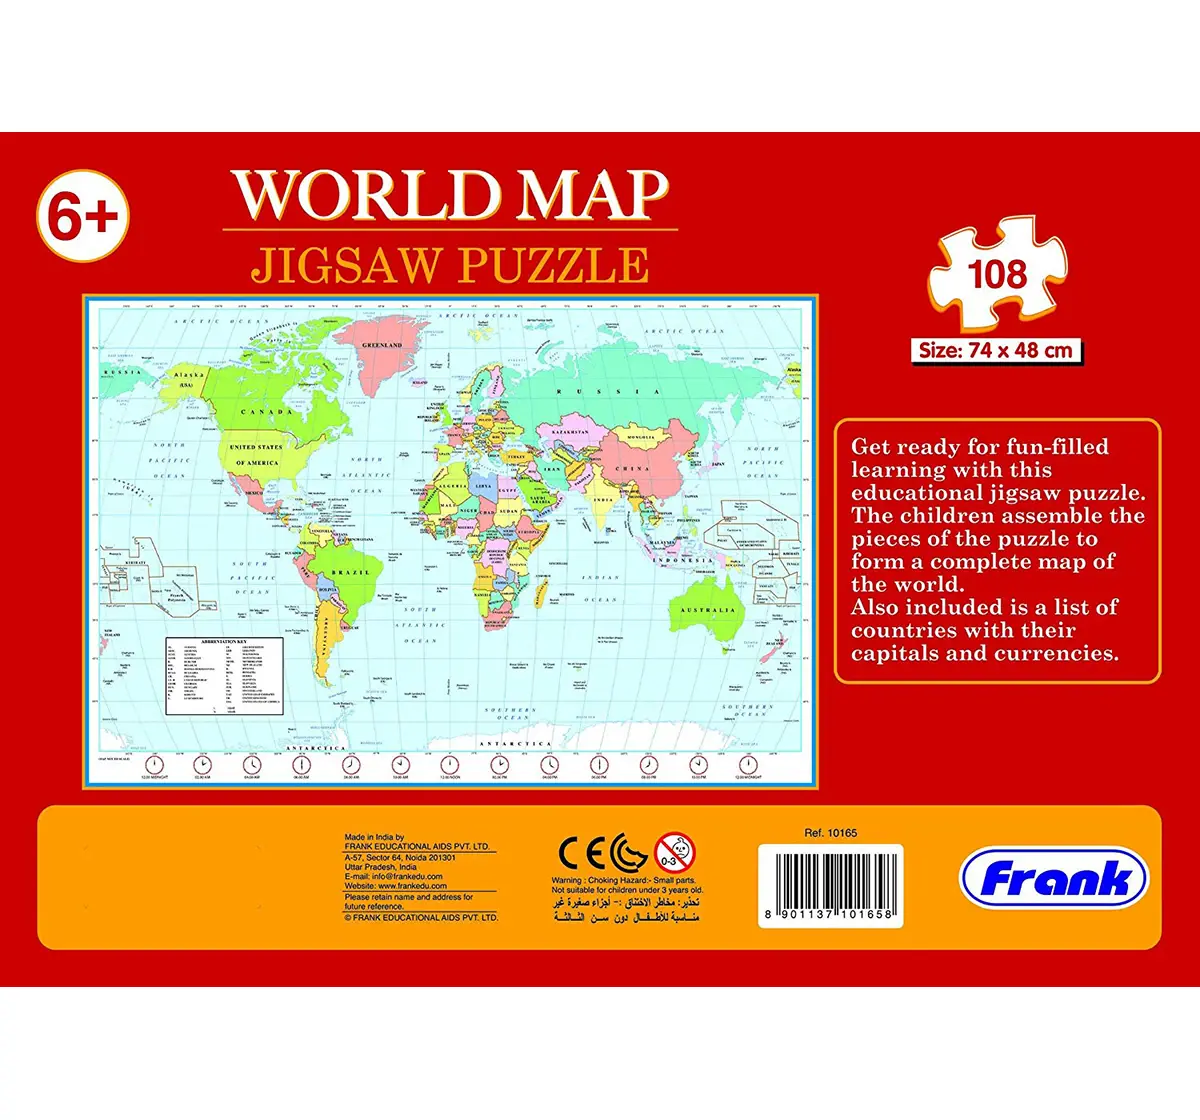 Shop Frank World Map - Giant Sized 108 Pcs Jigsaw Puzzle for Kids age 6Y+